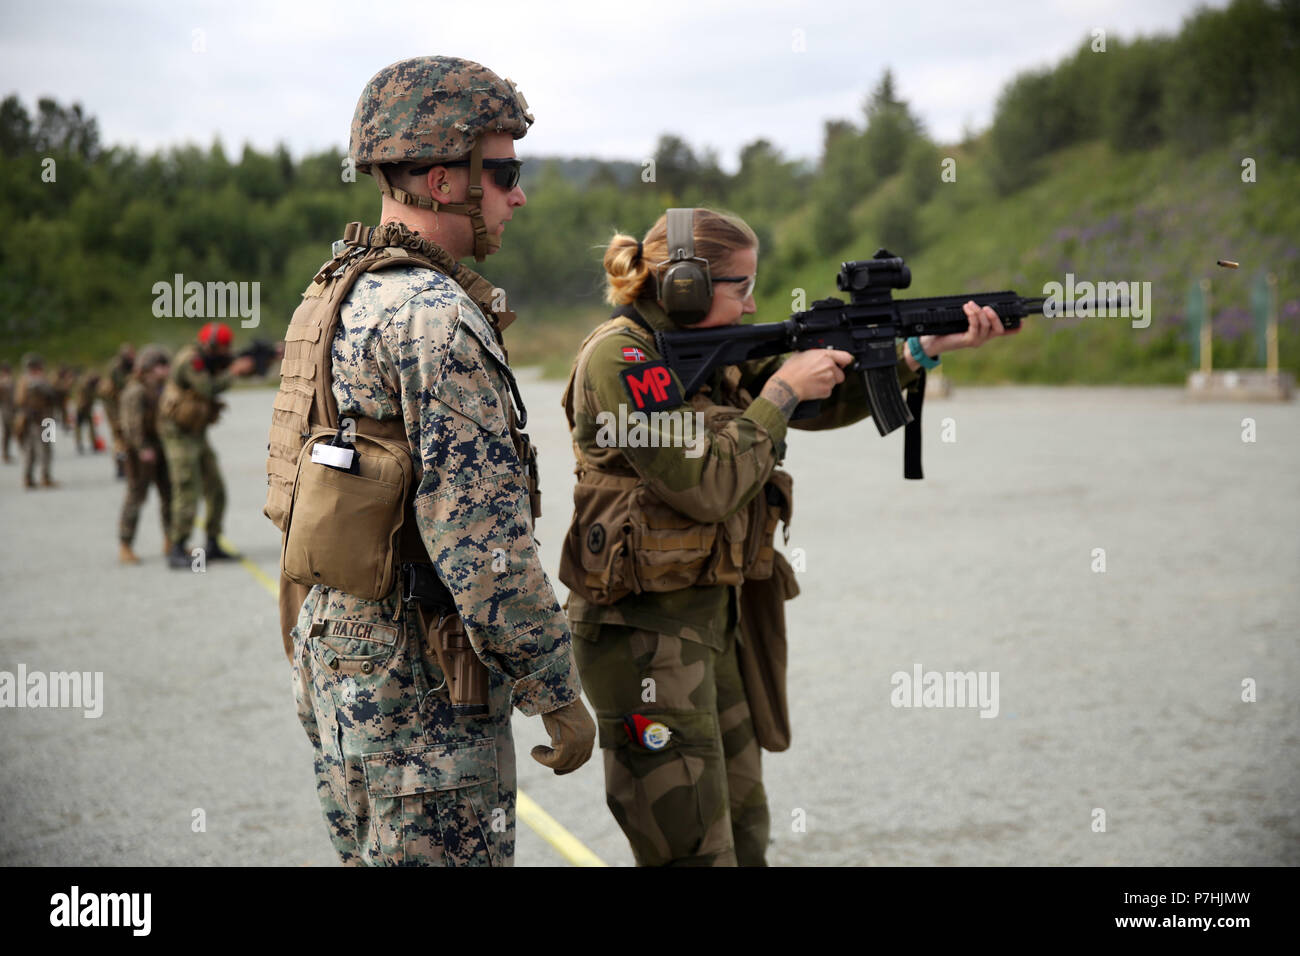 A U.S. Marine with Marine Rotational Force-Europe 18.1 coaches a Norwegian military policeman during a weapon transition range at Leksdal Skytefelt Training Complex, Norway, June 27, 2018. The multinational training allowed the service members to cross-train with American and Norwegian weapon systems including assault rifles, shotguns, and pistols. The Marines and Norwegian soldiers practiced firing from behind barricades and transitioning between weapon systems. (U.S. Marine Corps photo by Cpl. Gloria Lepko/Released) Stock Photo